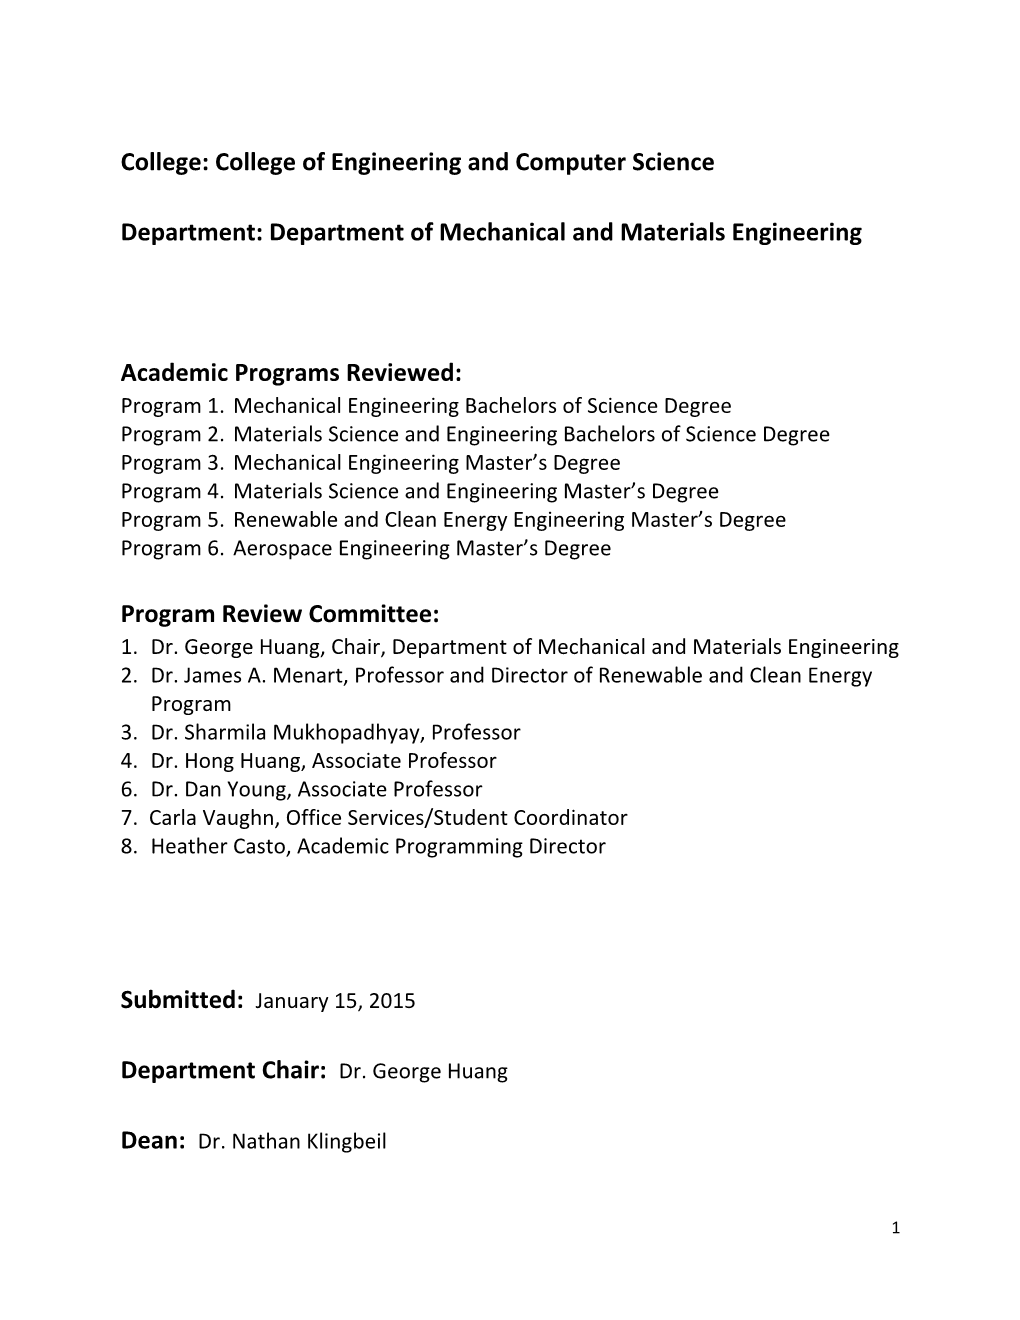 College of Engineering and Computer Science Department Department of Mechanical and Materials Engineering Degree (A.A